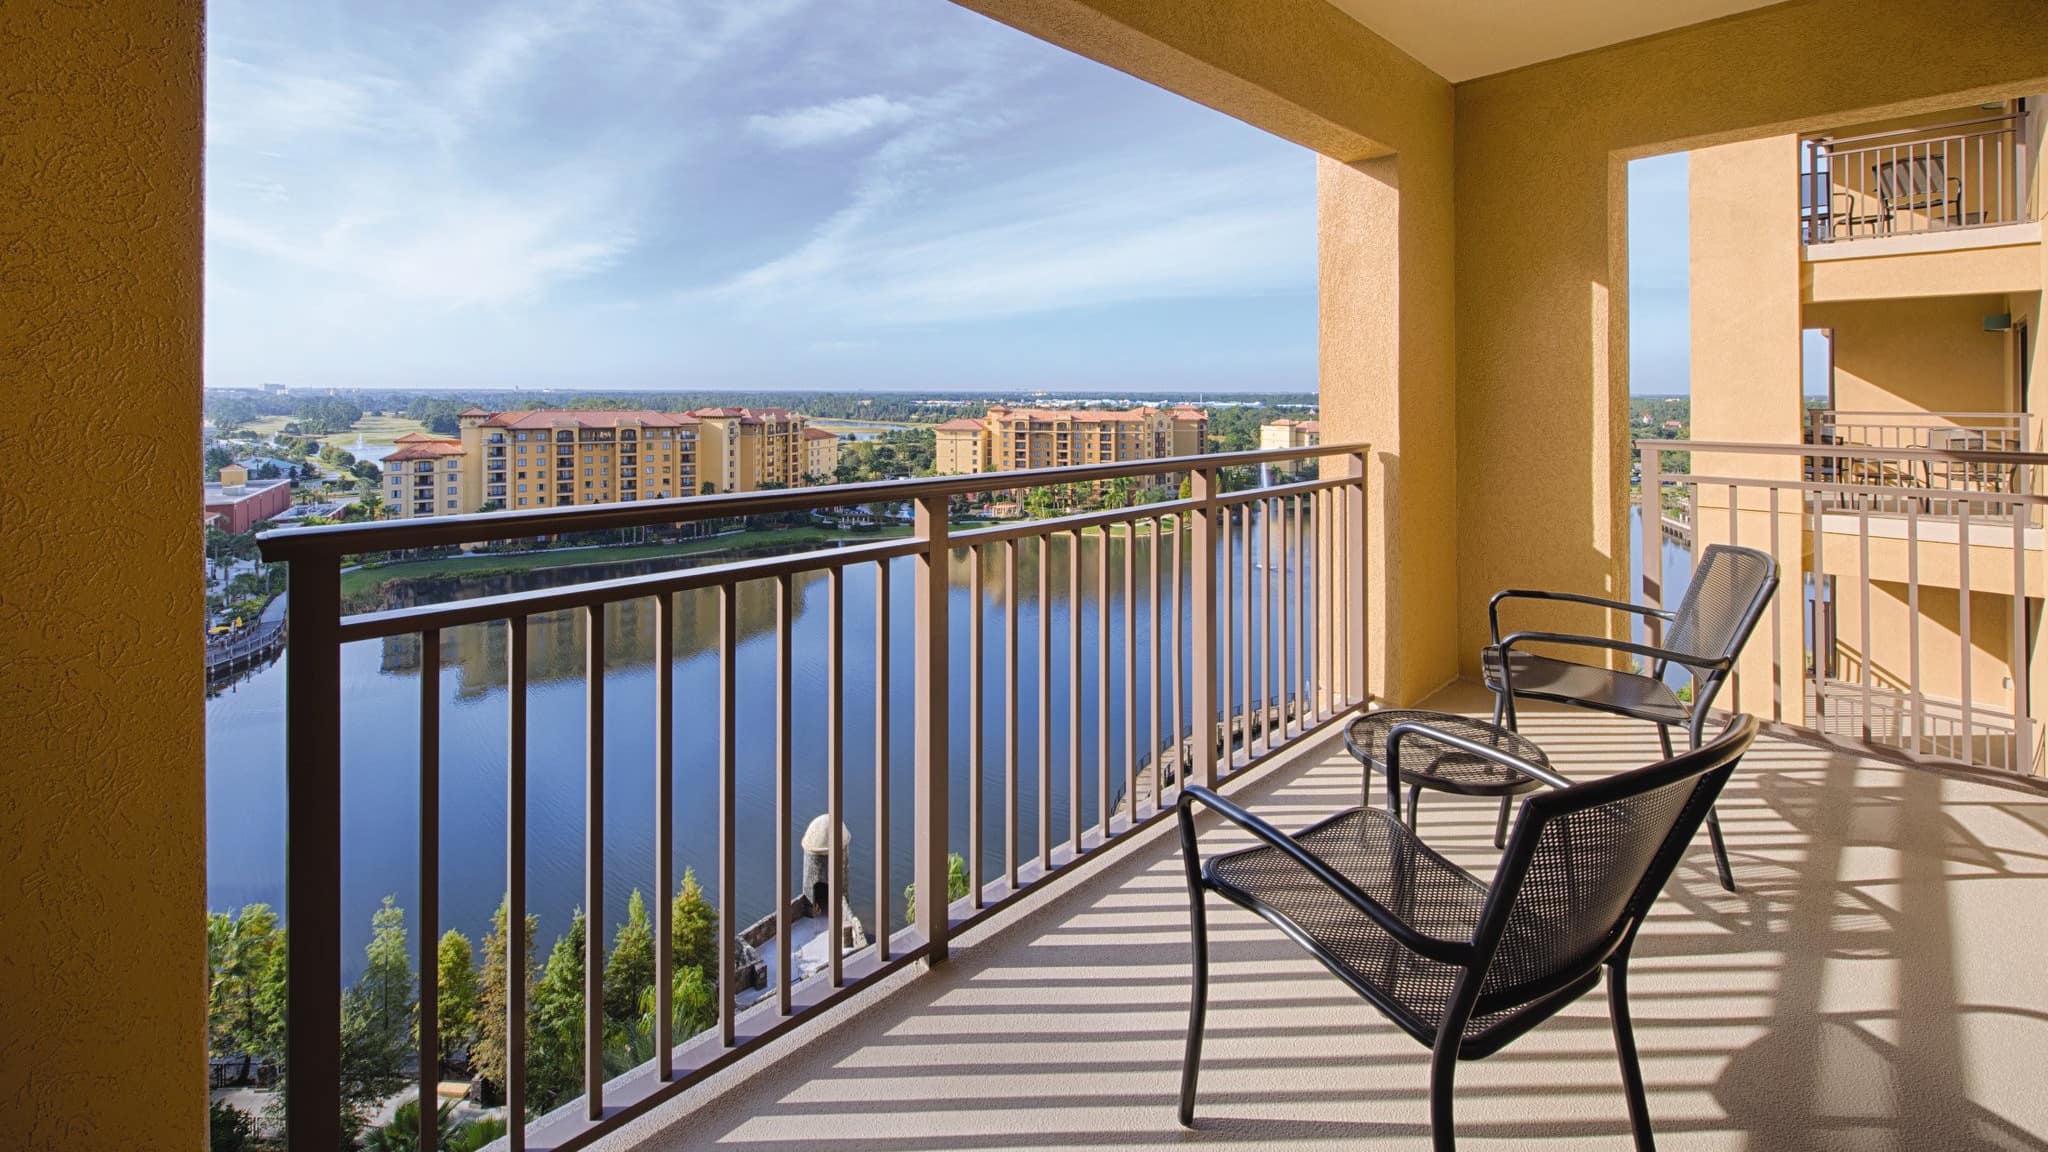 Disney Vacation Club rentals and more